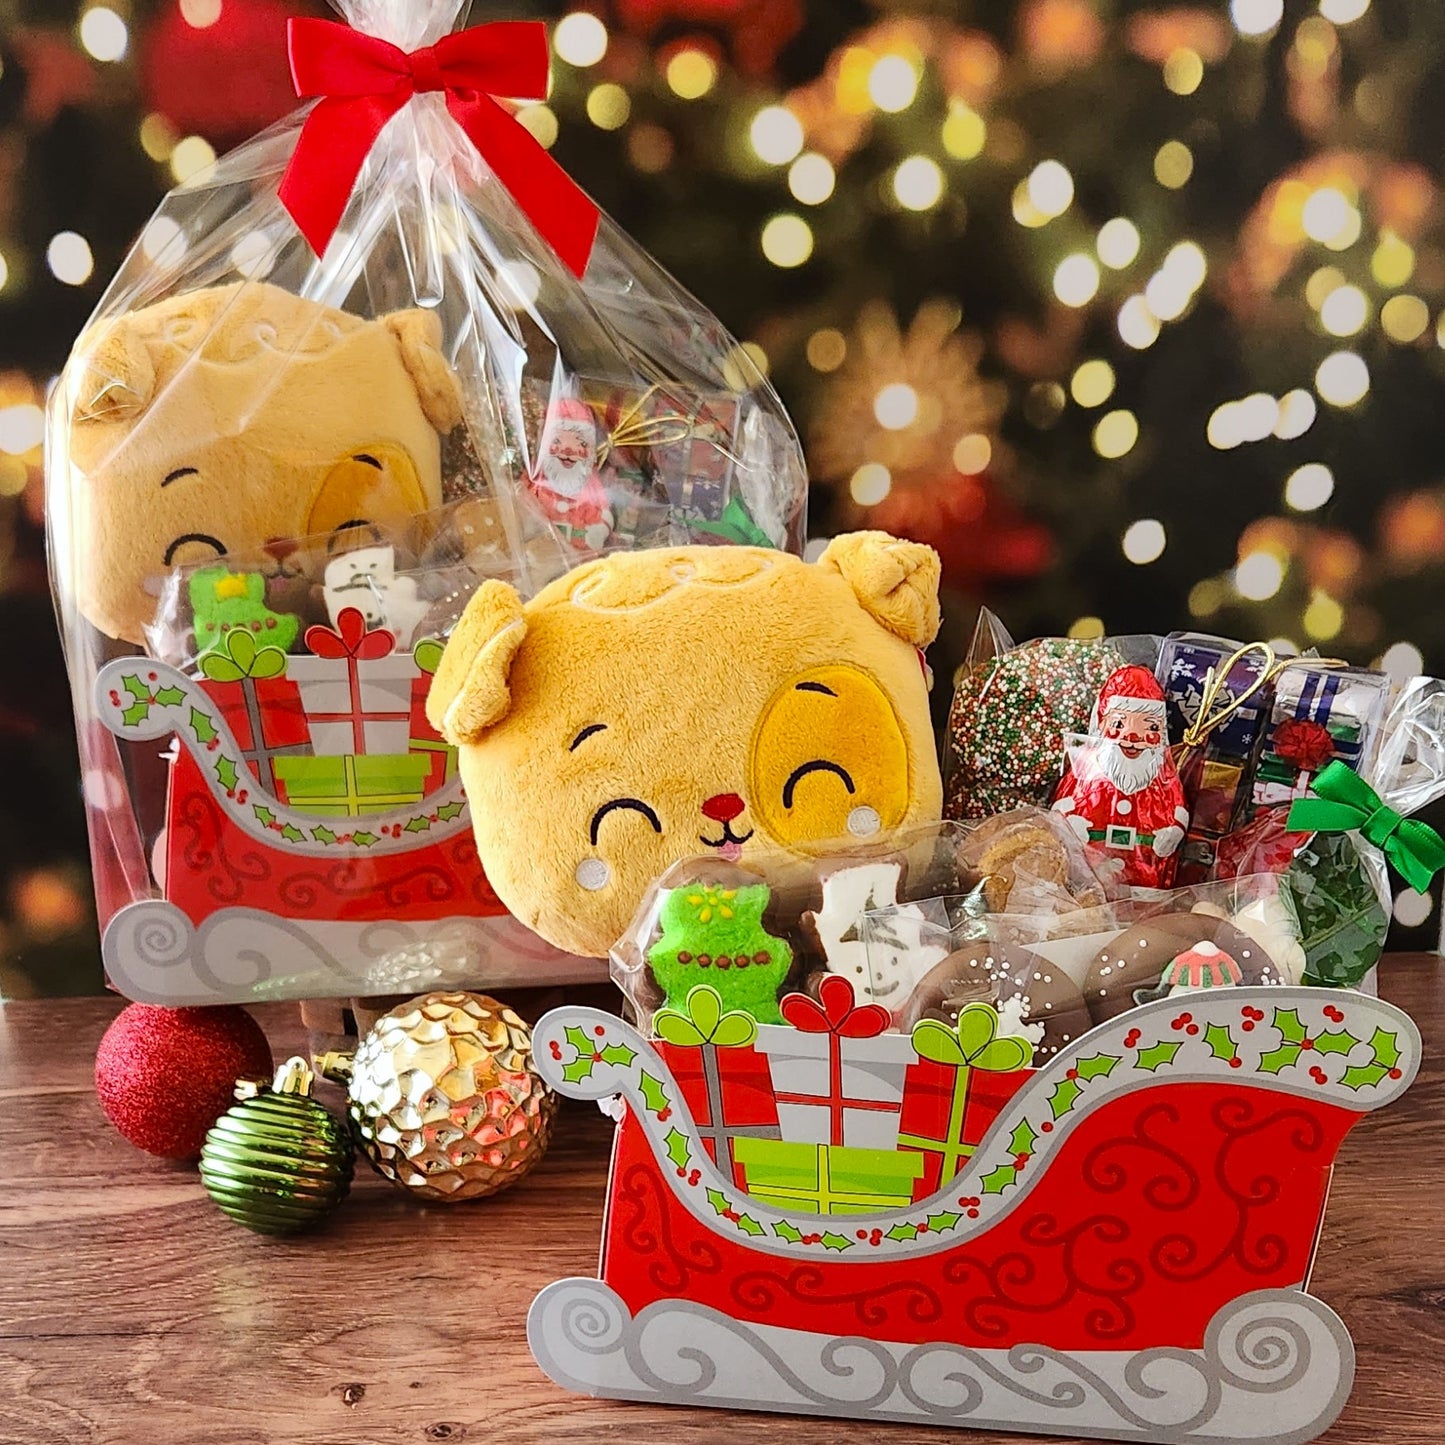 A holiday gift for everyone! Includes a cute stuffed animal and assortment of festive holiday chocolates and treats. 